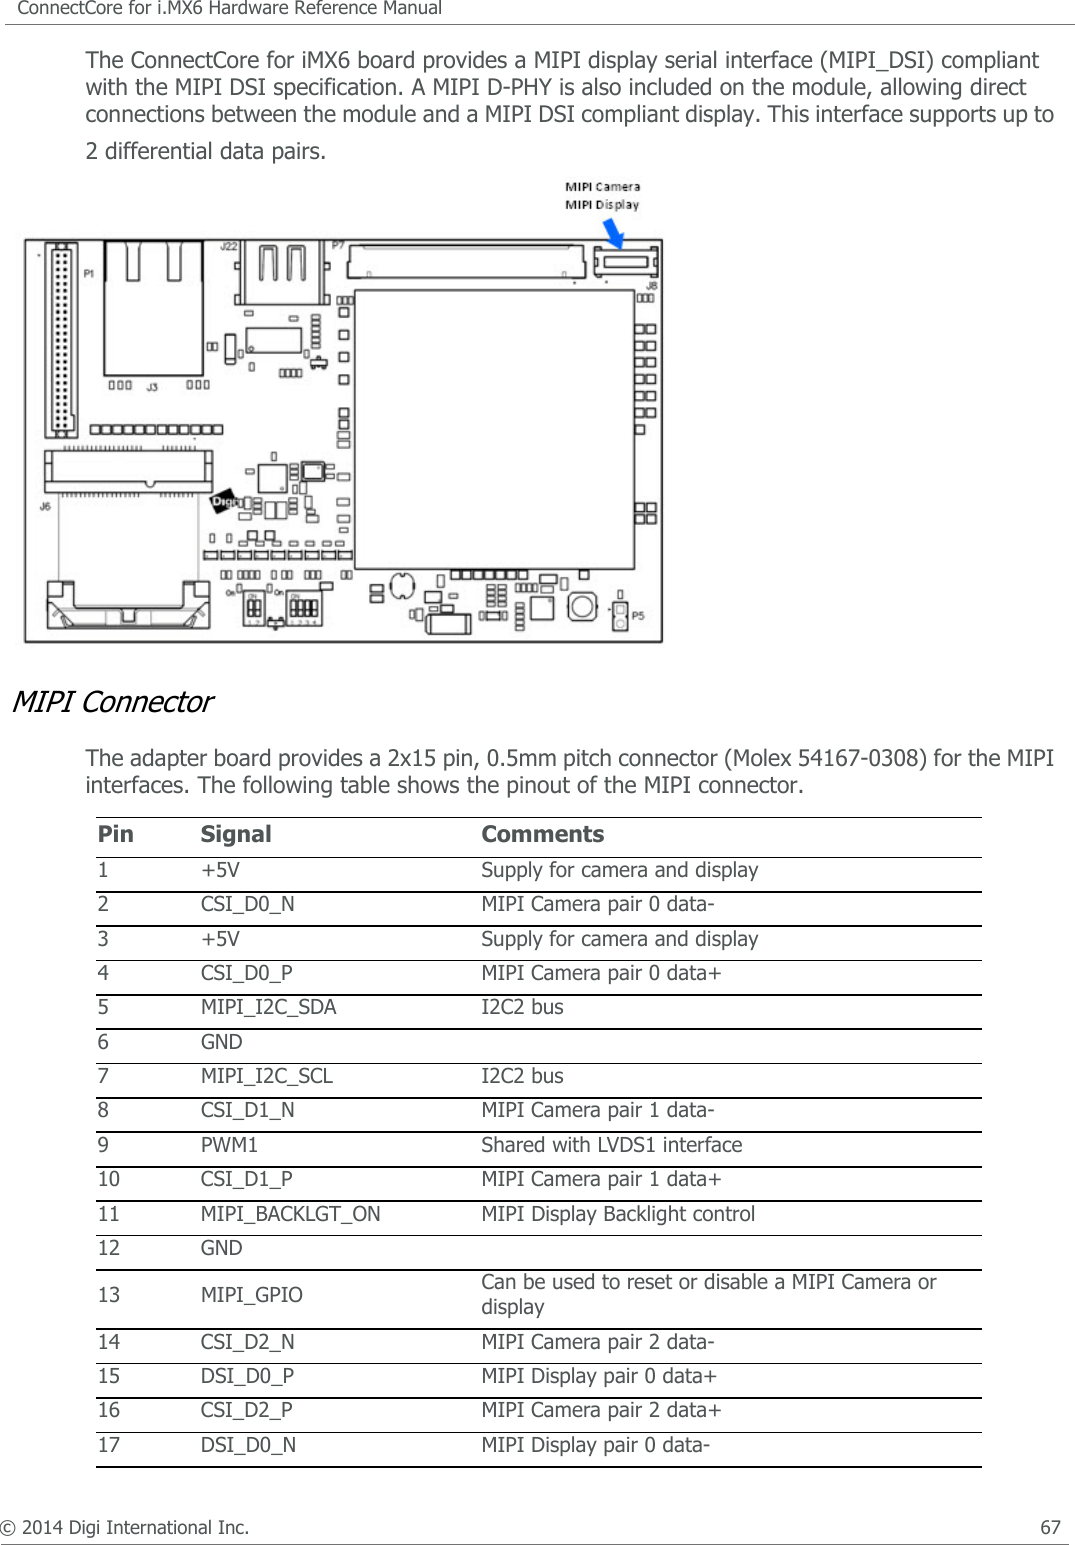 © 2014 Digi International Inc.      65ConnectCore for i.MX6 Hardware Reference ManualLVDS1LVDS InterfaceThe adapter board provides a 30 pin, 1.25mm pitch connector (Hirose DF14-30P-1.25H) for accessing the ConnectCore 6 LVDS1 interface.The LVDS connector provides access to the following LVDS capabilities:•  4 LVDS differential data pairs•  1 LVDS differential clock pair•  SPI bus for an external touch screen controller•  Interrupt input for touch screen•  PWM output to control the backlight brightness•  +3.3VDC and +5VDC supplies12 HDMI_TXC- Transmission pair clock-13 NC Consumer electronic control14 NC Reserved15 HDMI_SCL I2C SCL16 HDMI_SDA I2C SDA17 GND DDC/CEC Ground18 +5V 5V supply (50mA max)19 HOTPLUG_DET Hot plug detection